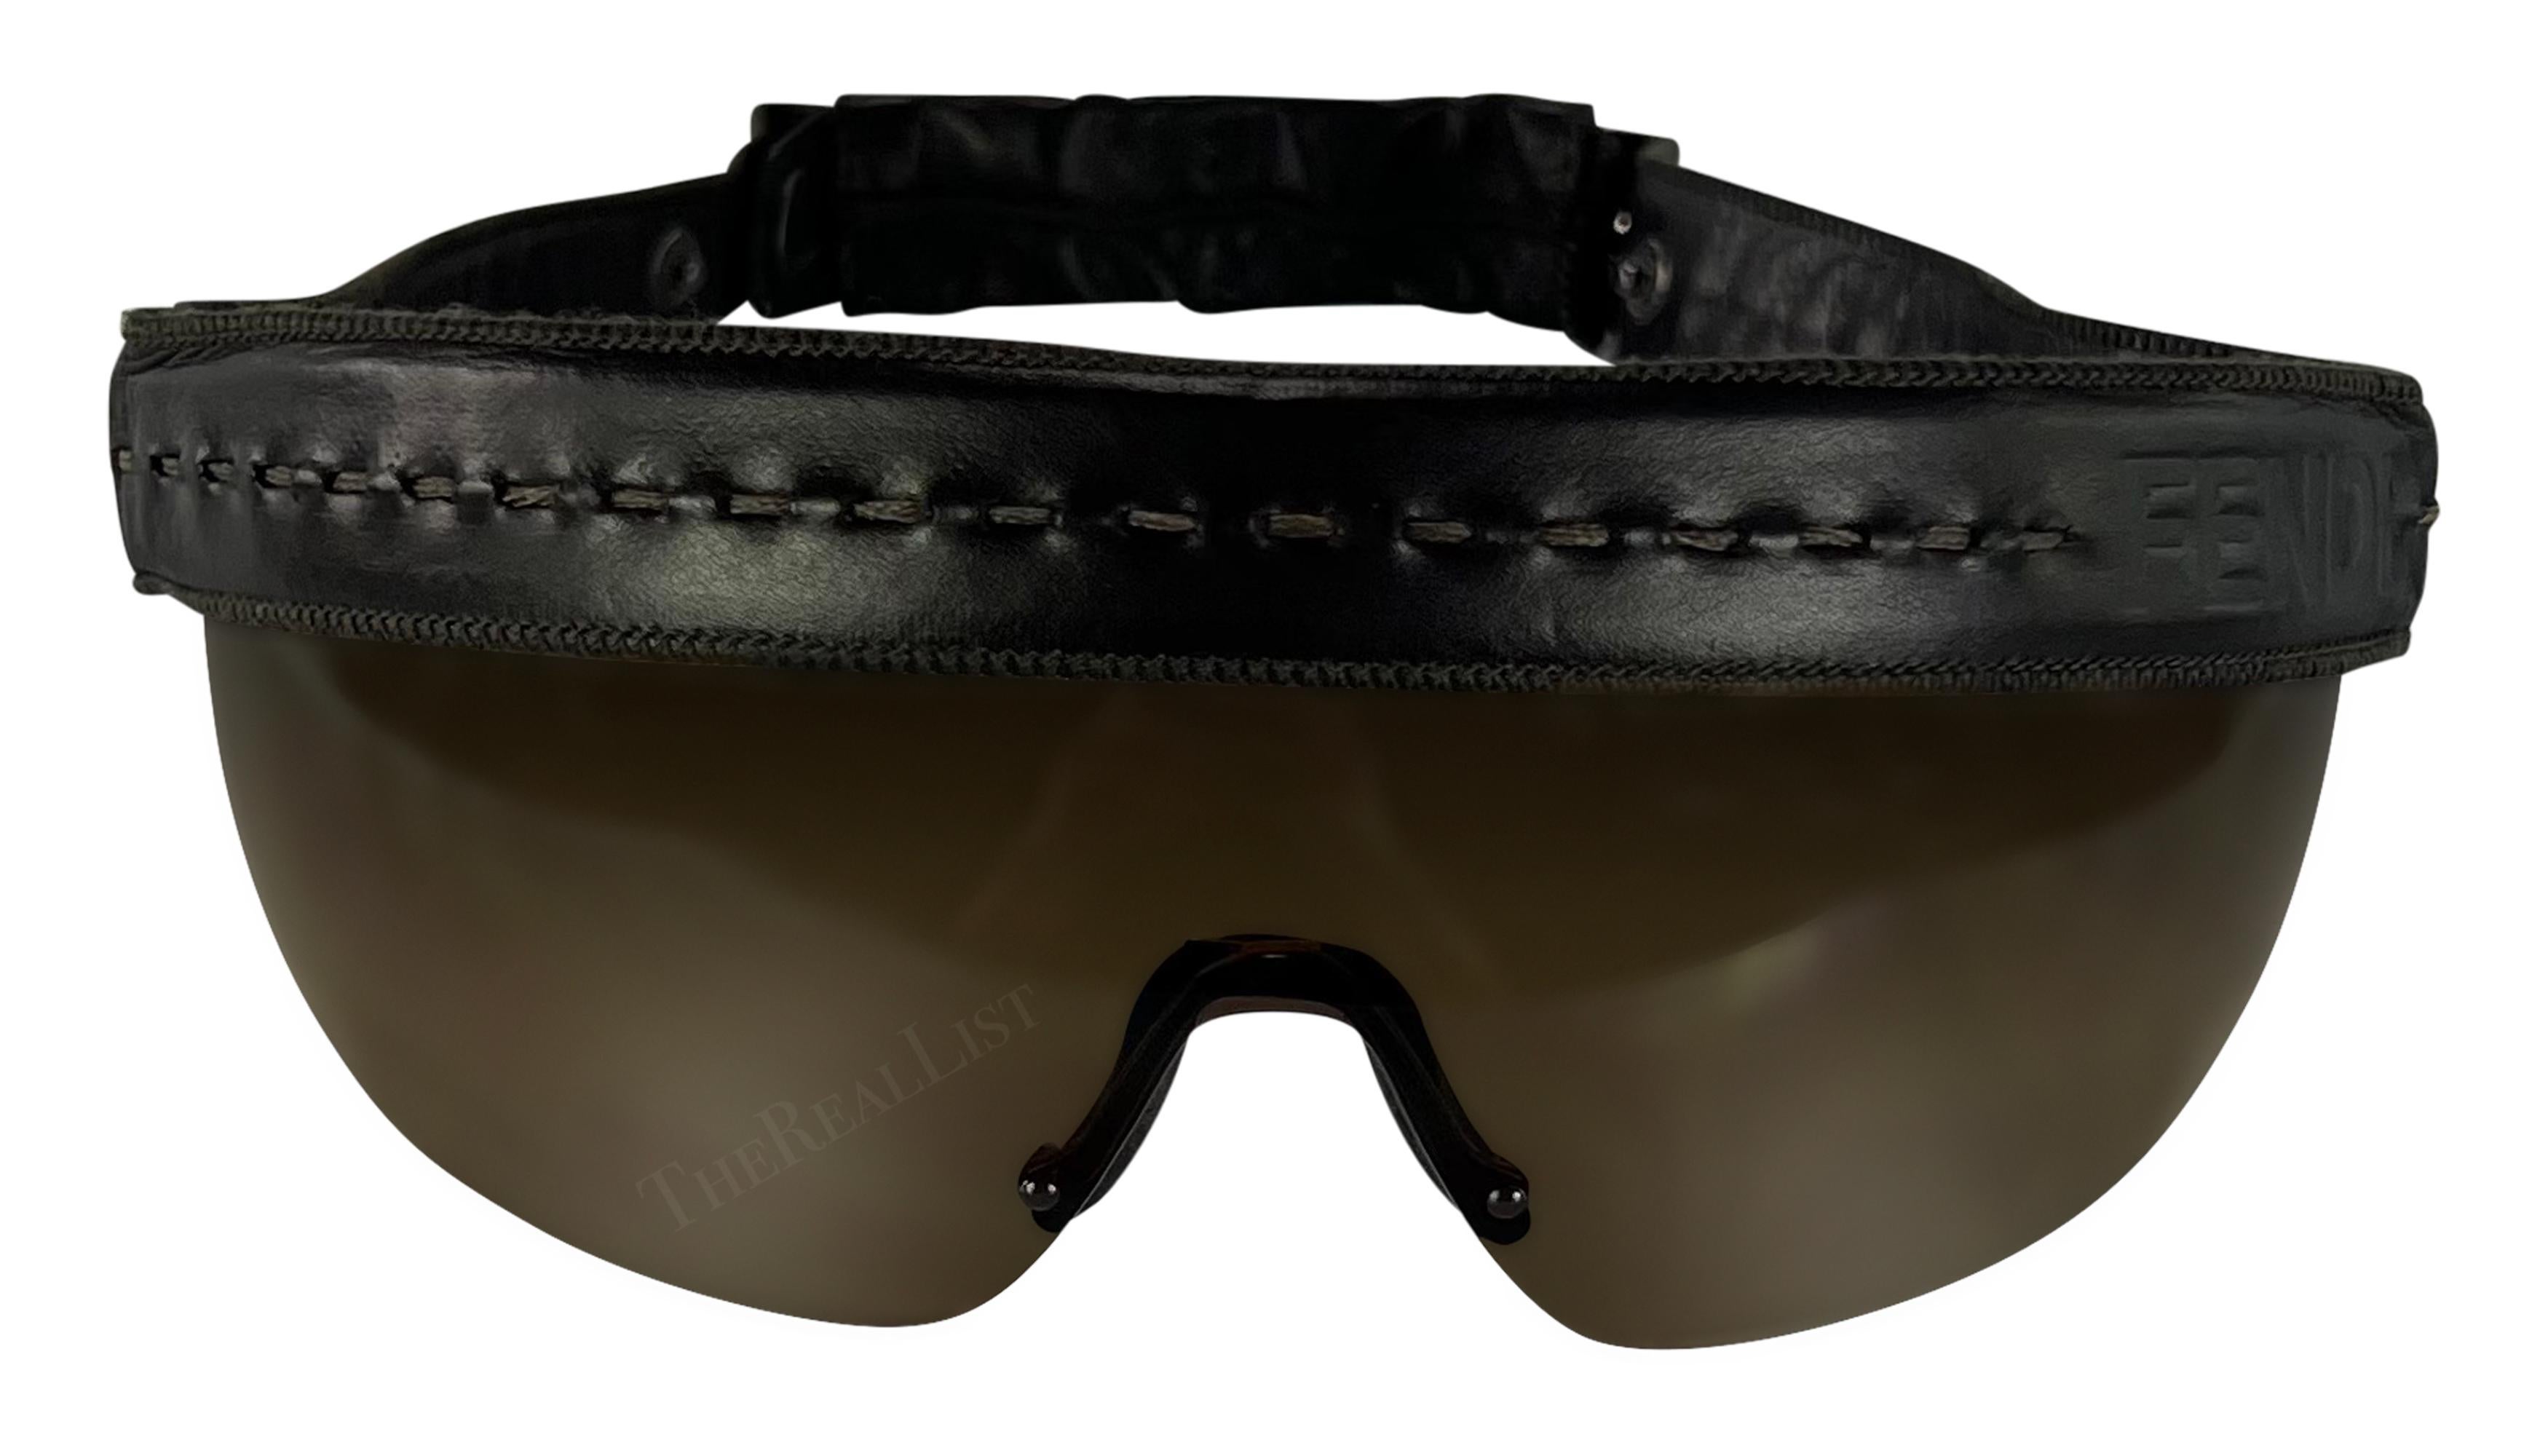 Elevate your style with these vintage brown Fendi shield sunglasses, designed by Karl Lagerfeld in the 2000s. These oversized shades feature a braided leather headband, complete with long leather fringe accents that cascade down the back. These